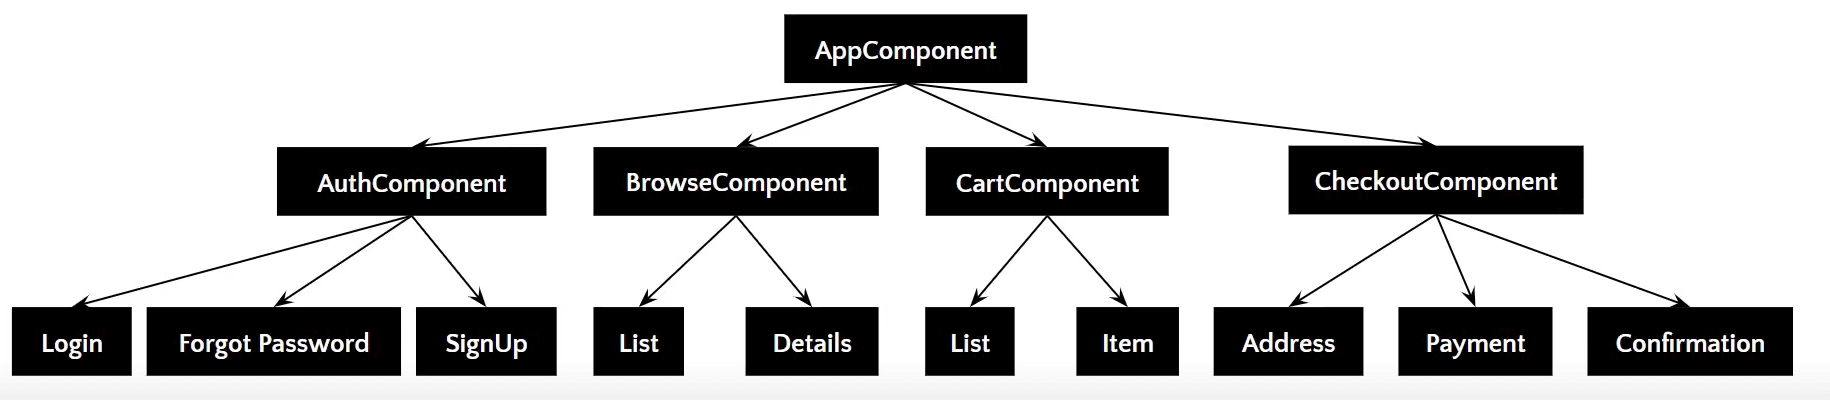 components_hierarchy-angular_components